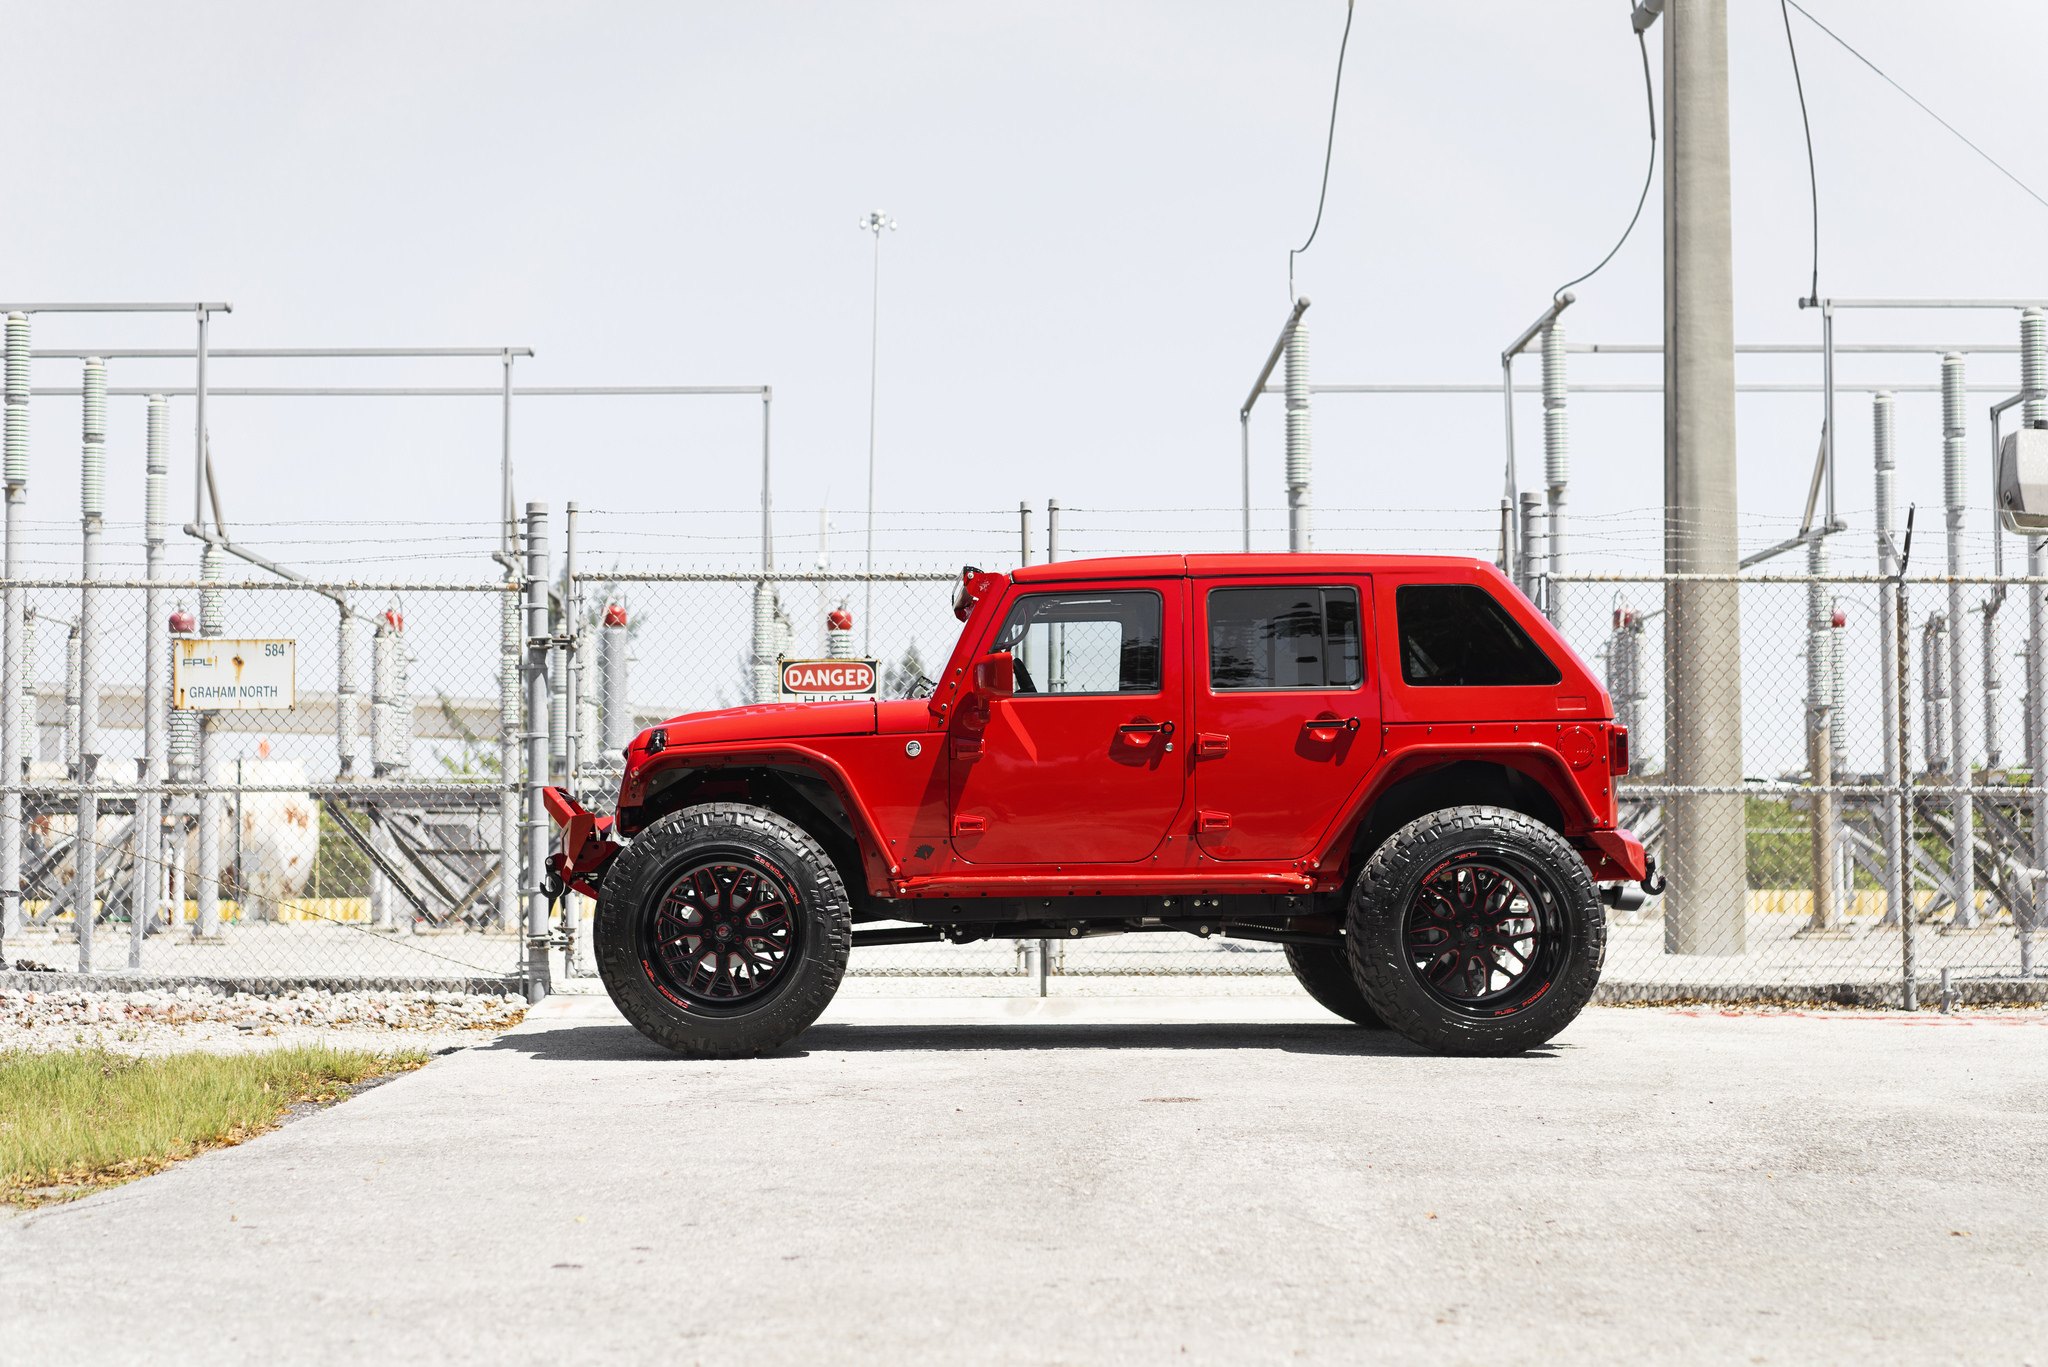 Fastback Style Hard Top on a Modified JK Unlimited - Photo by Fuel Off-Road